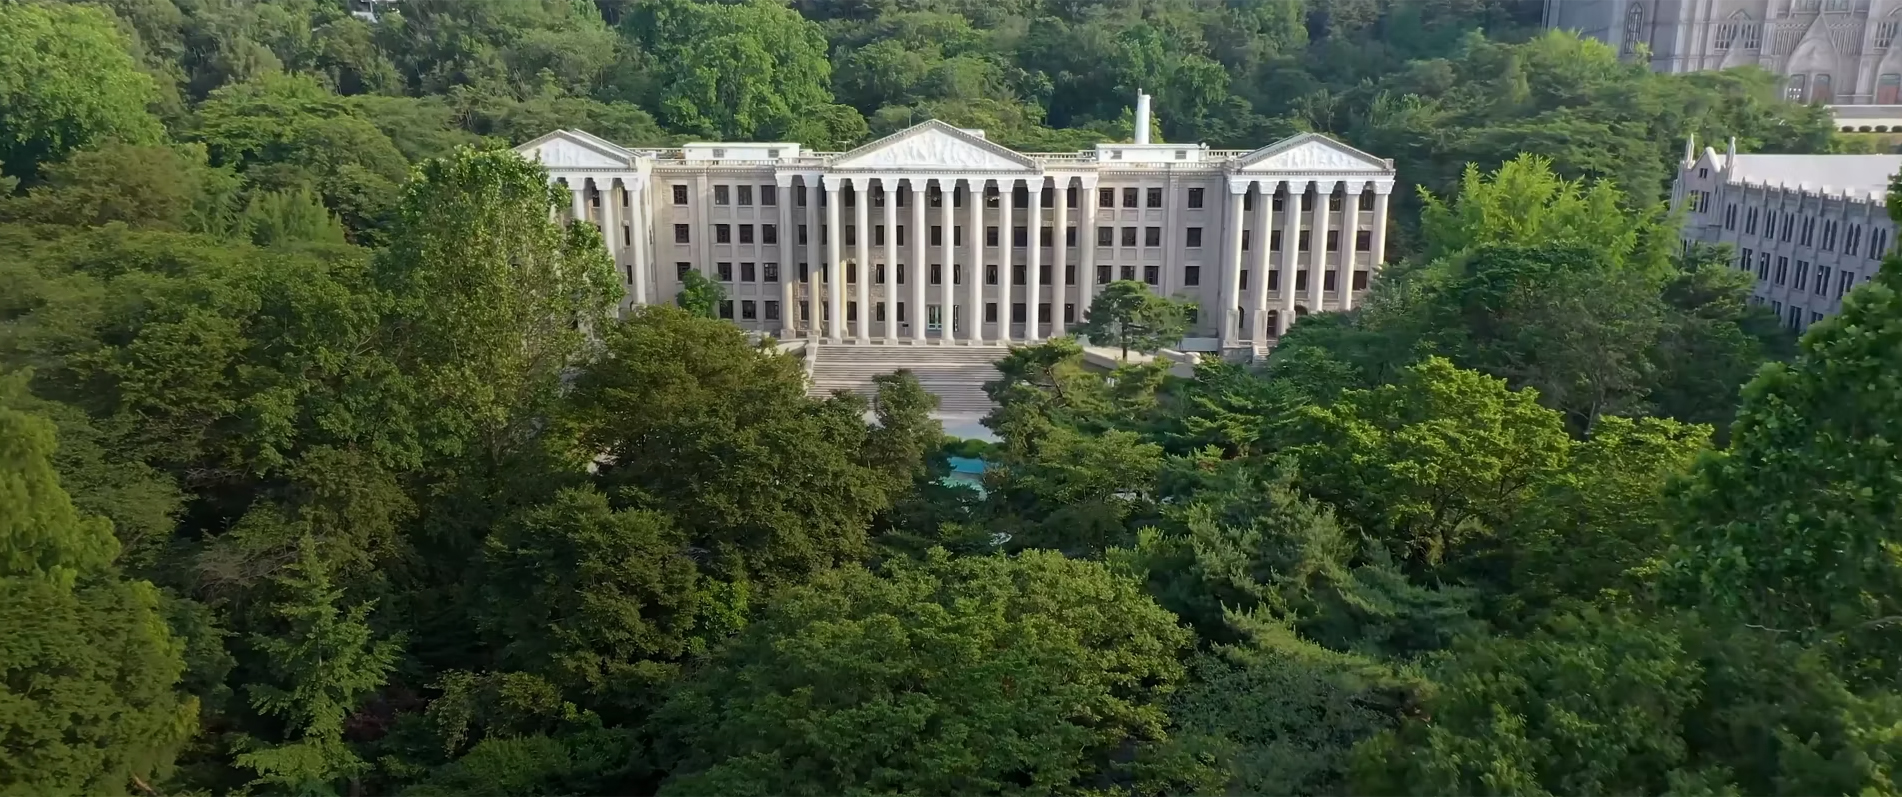 Welcome to Kyung Hee University, Provost office